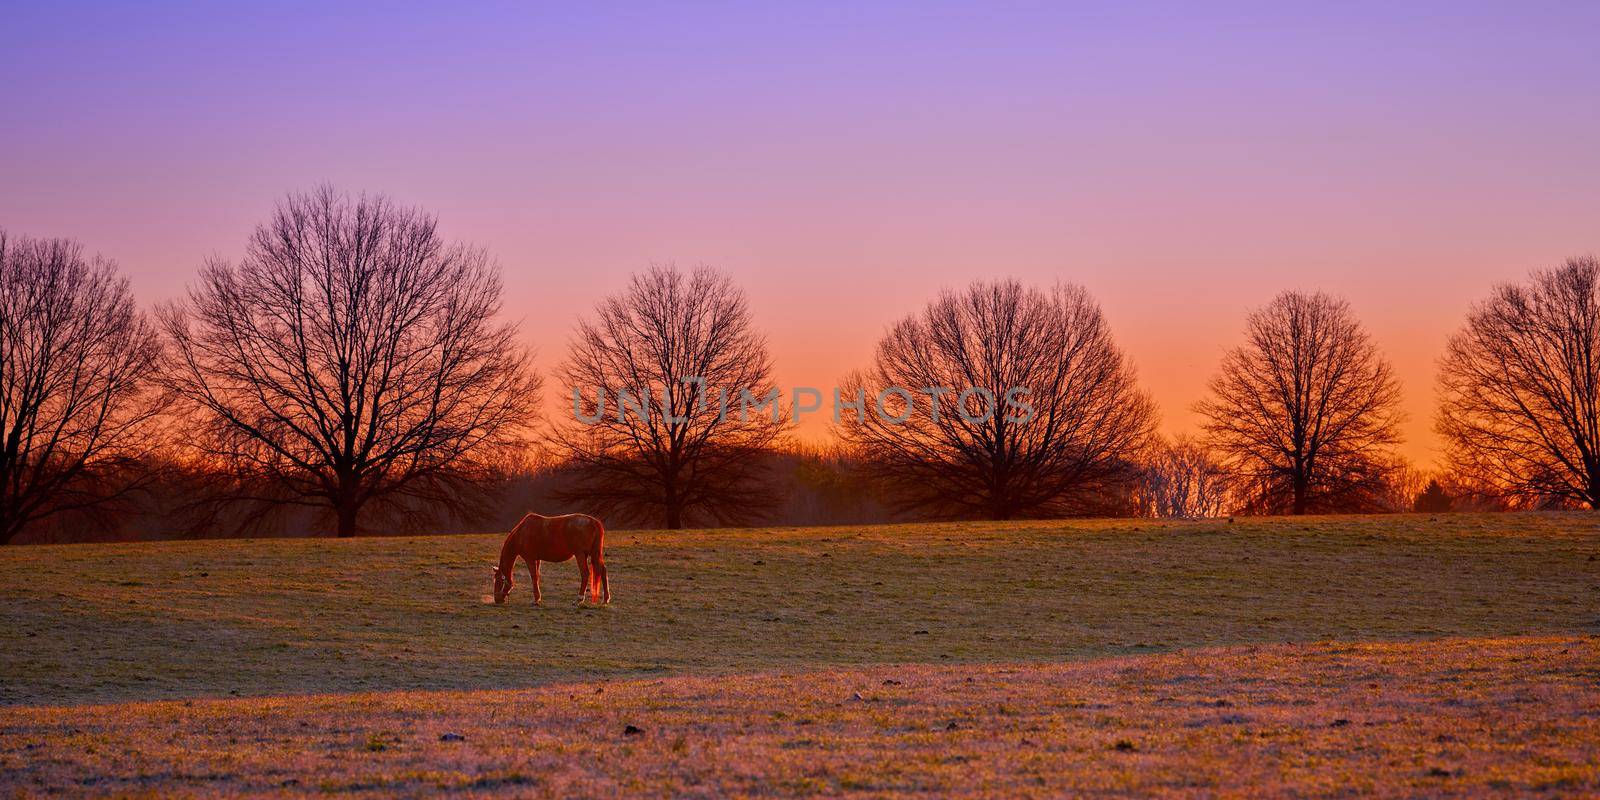 Single thoroughbred horses grazing at sunrise in a field.